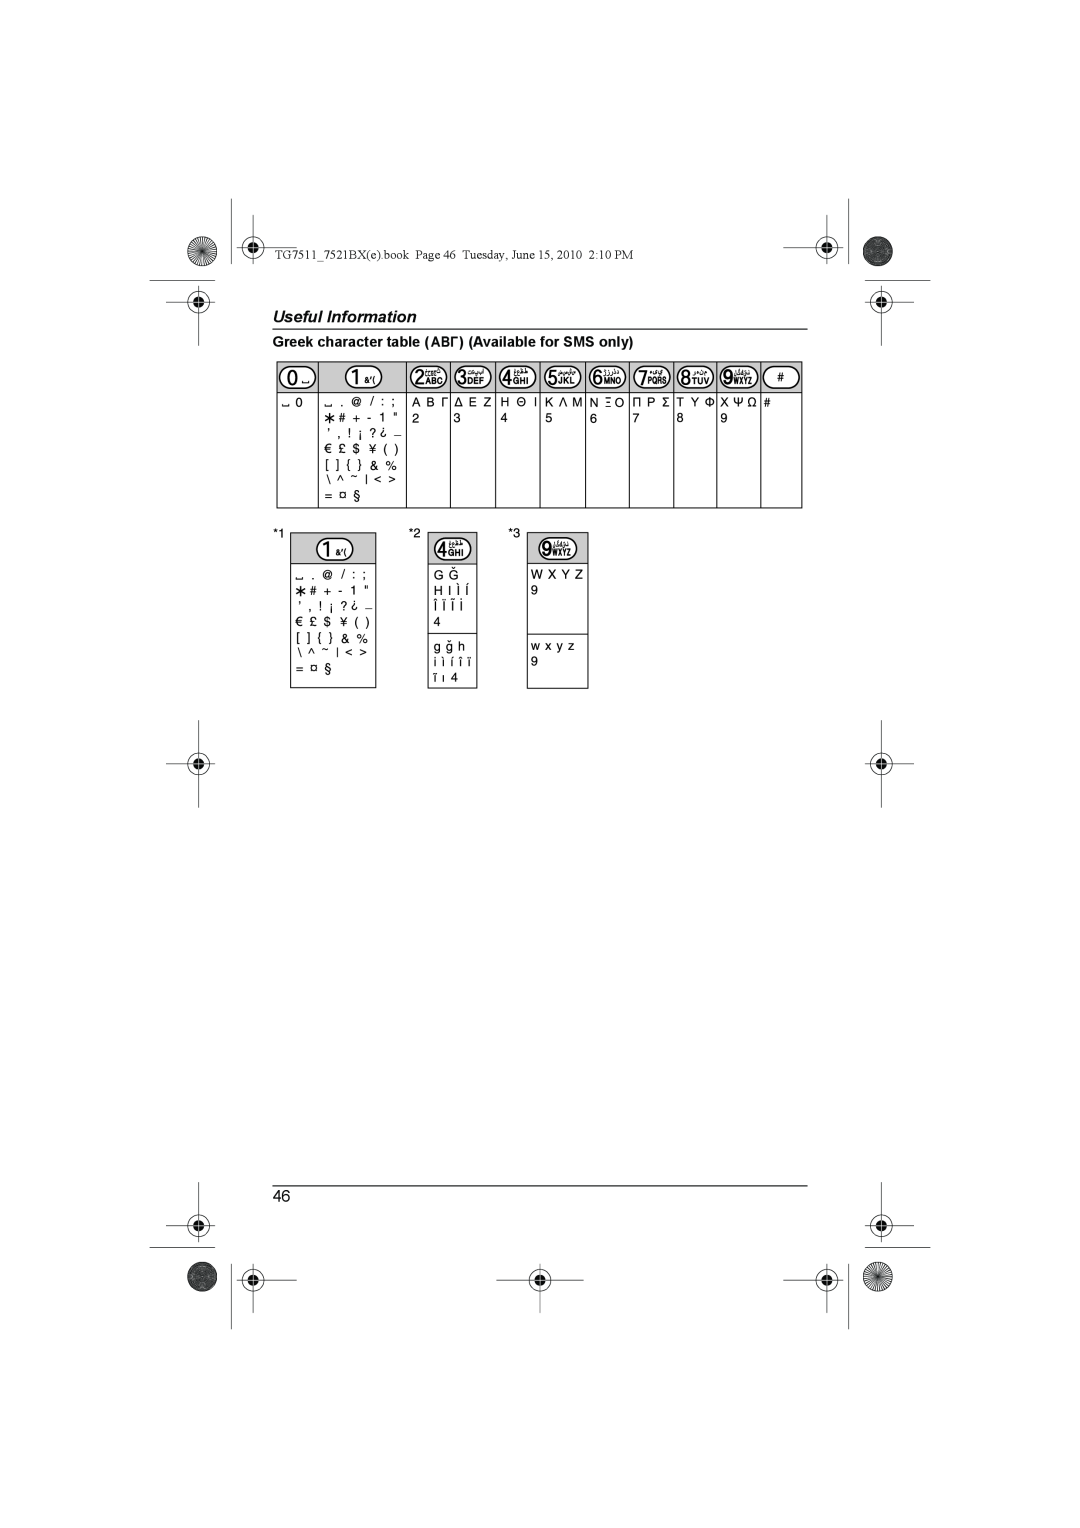 Panasonic KX-TG7521BX, KX-TG7511 operating instructions Greek character table M Available for SMS only, Useful Information 